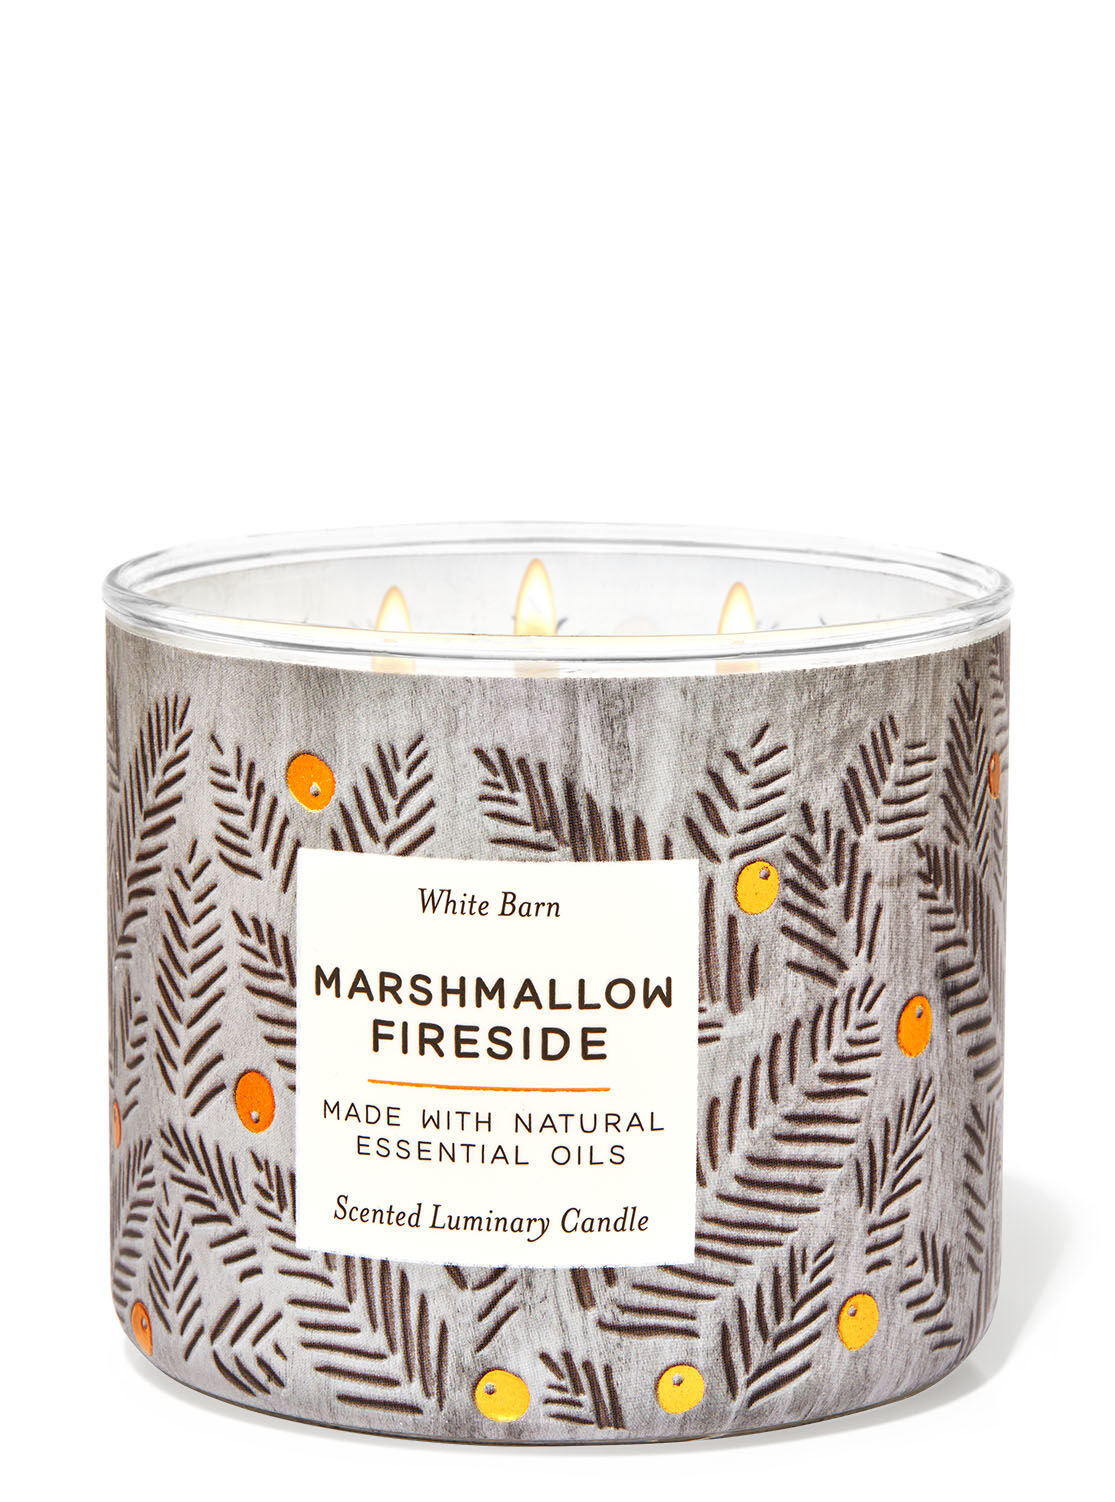 Bath Body Works White Barn Marshmallow Fireside 3-wick Scented Candle 14.5oz New 